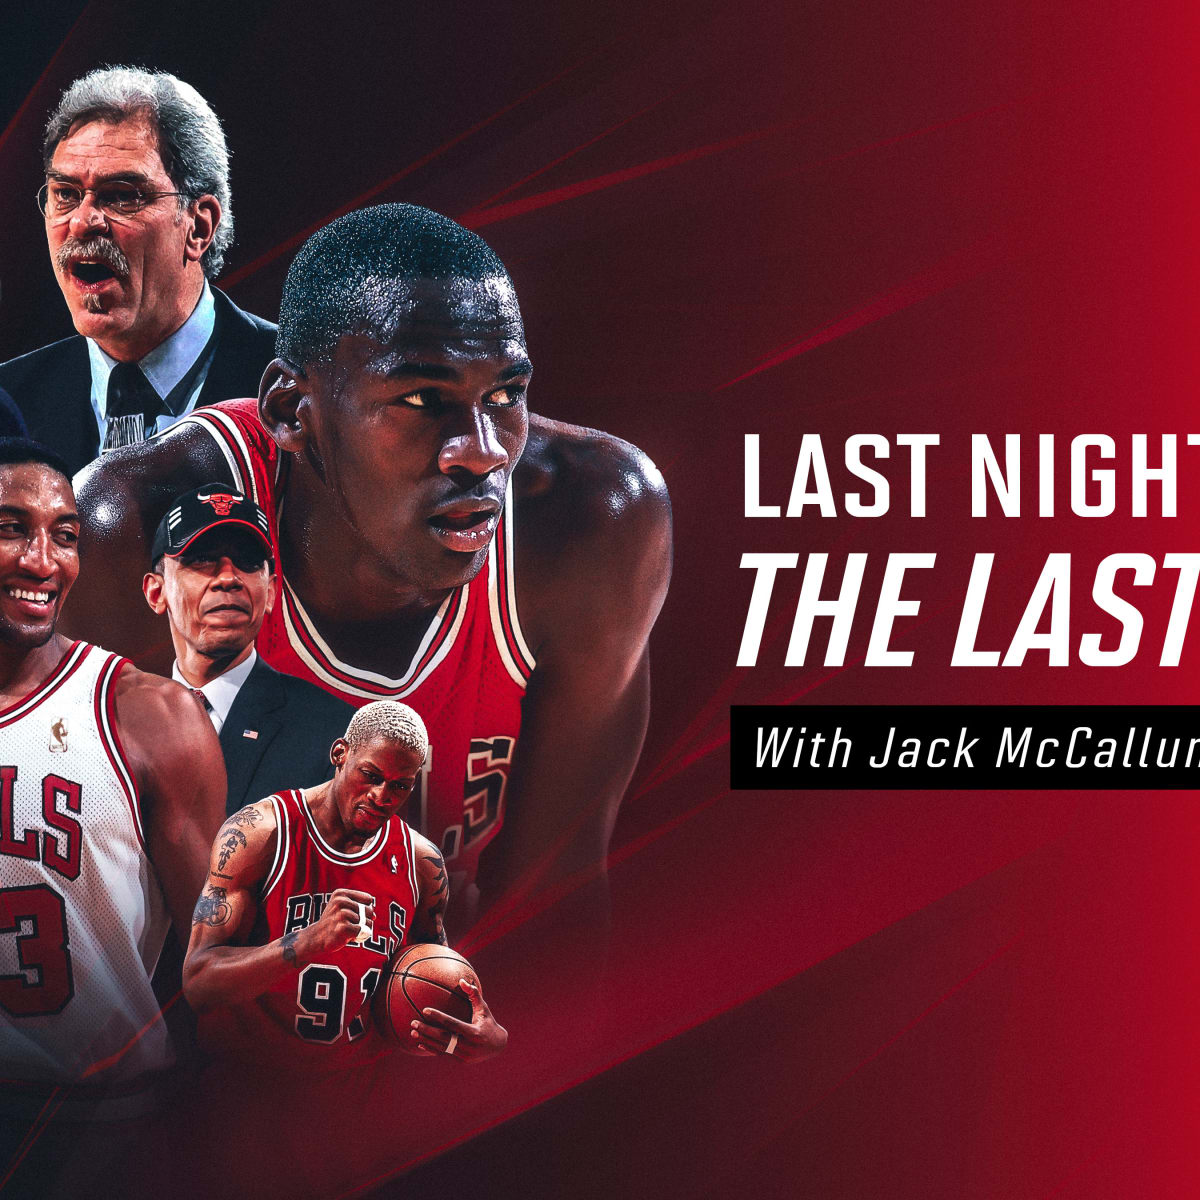 The Last Dance is over, but up next on ESPN: a film about Game 6